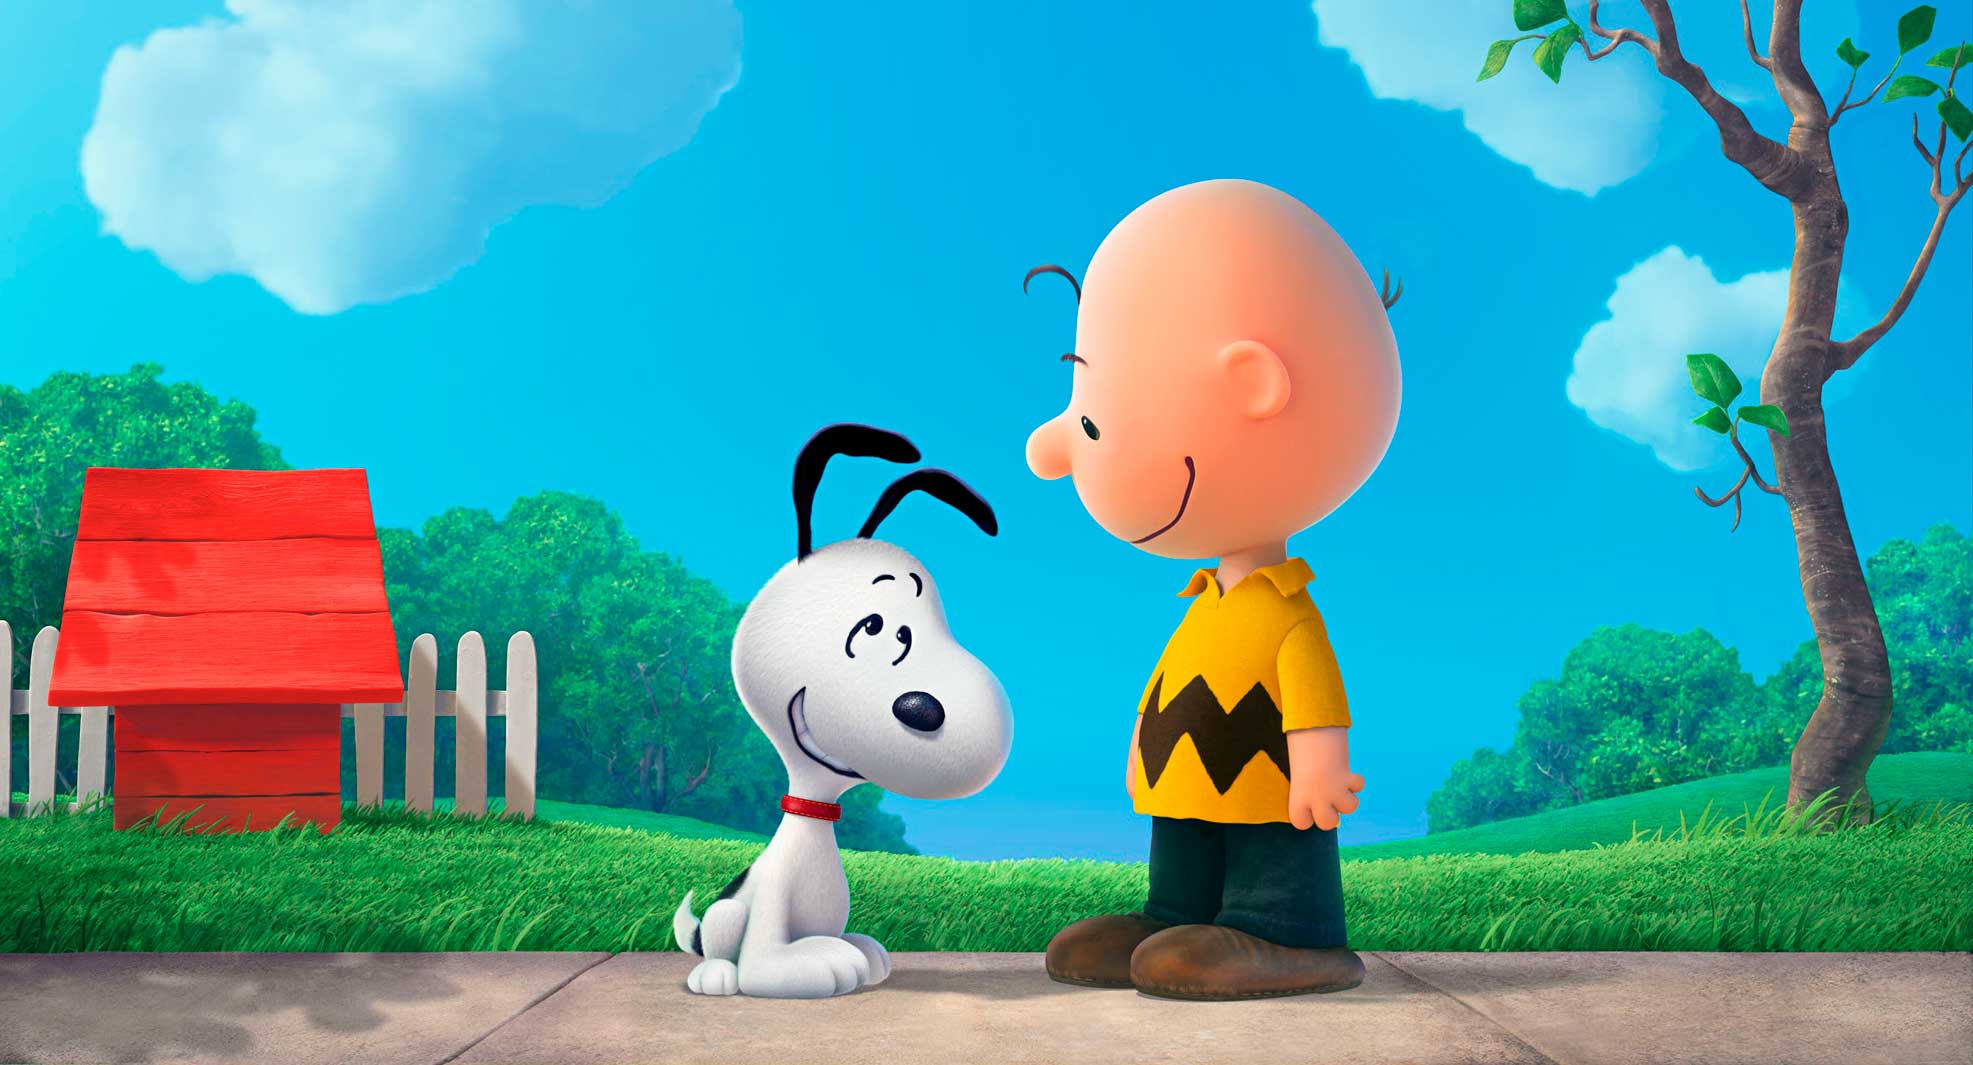 Though now rendered in 3-D, Snoopy and Charlie Brown are familiar as ever (20th Century Fox/Peanuts Worldwide LLC)